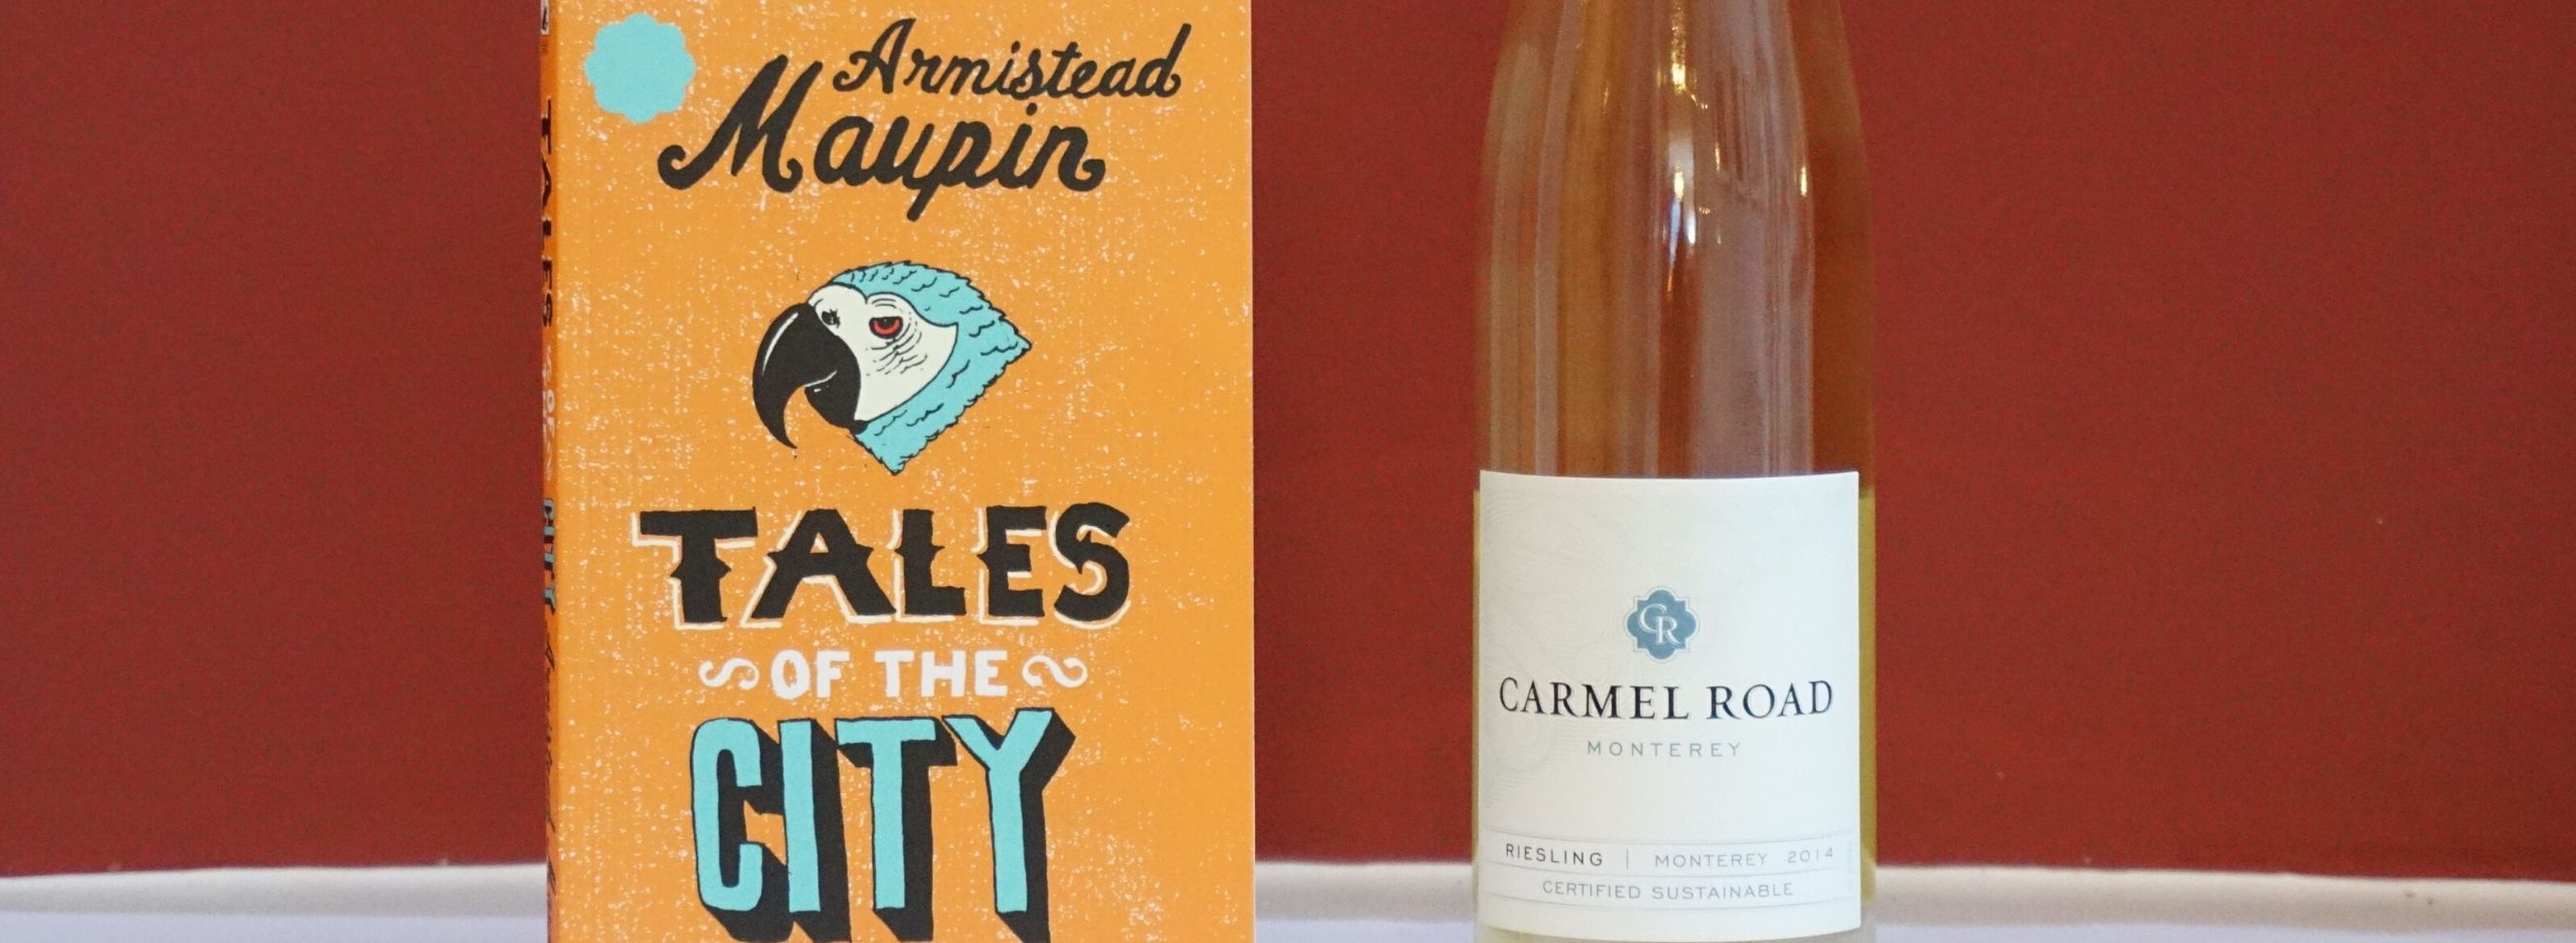 Tales of the City – Riesling Carmel Road 2014